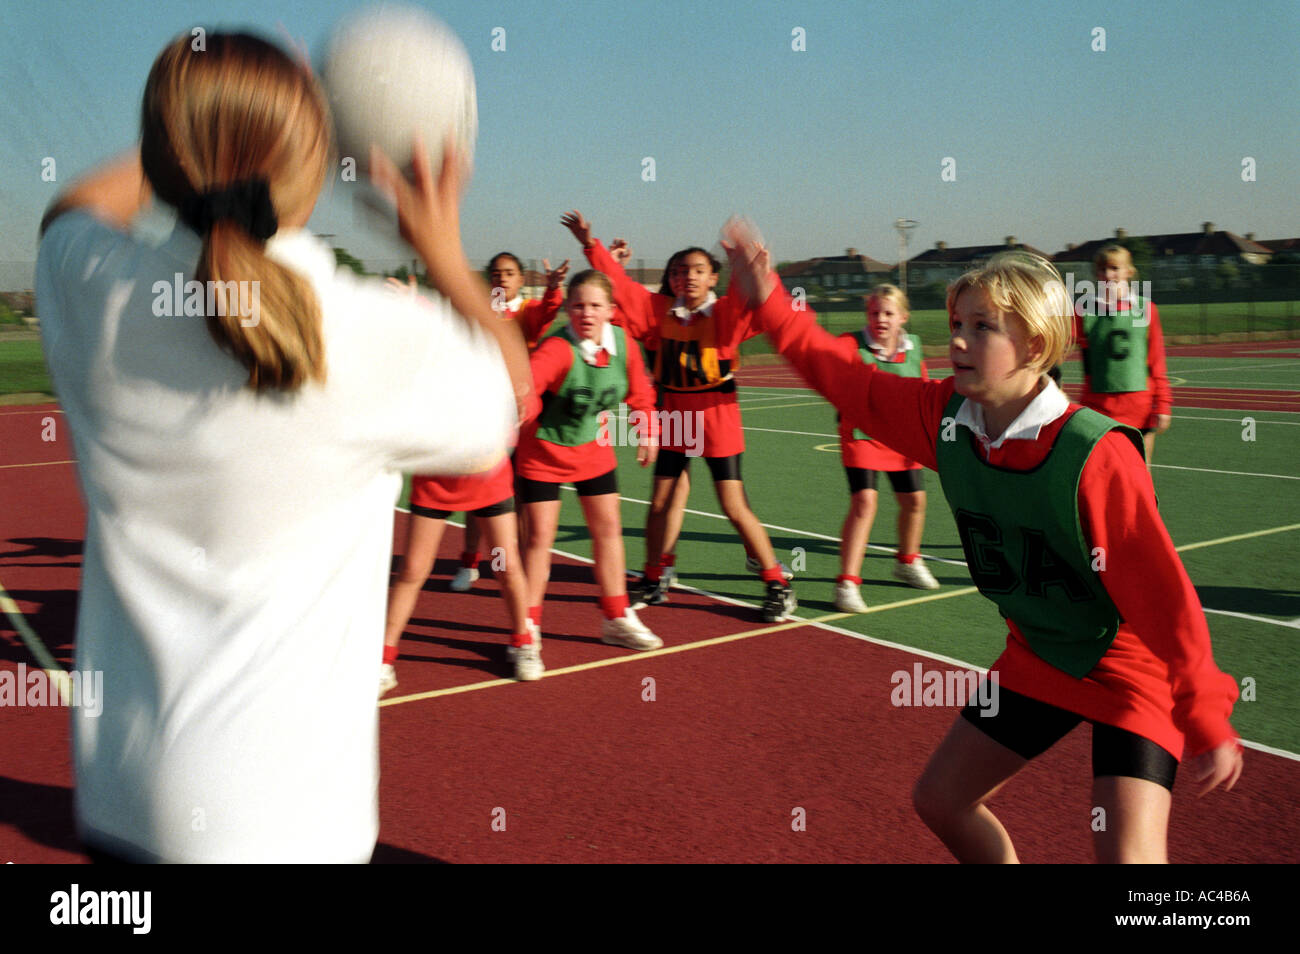 Females playing Basketball / netball at a secondary school Stock Photo